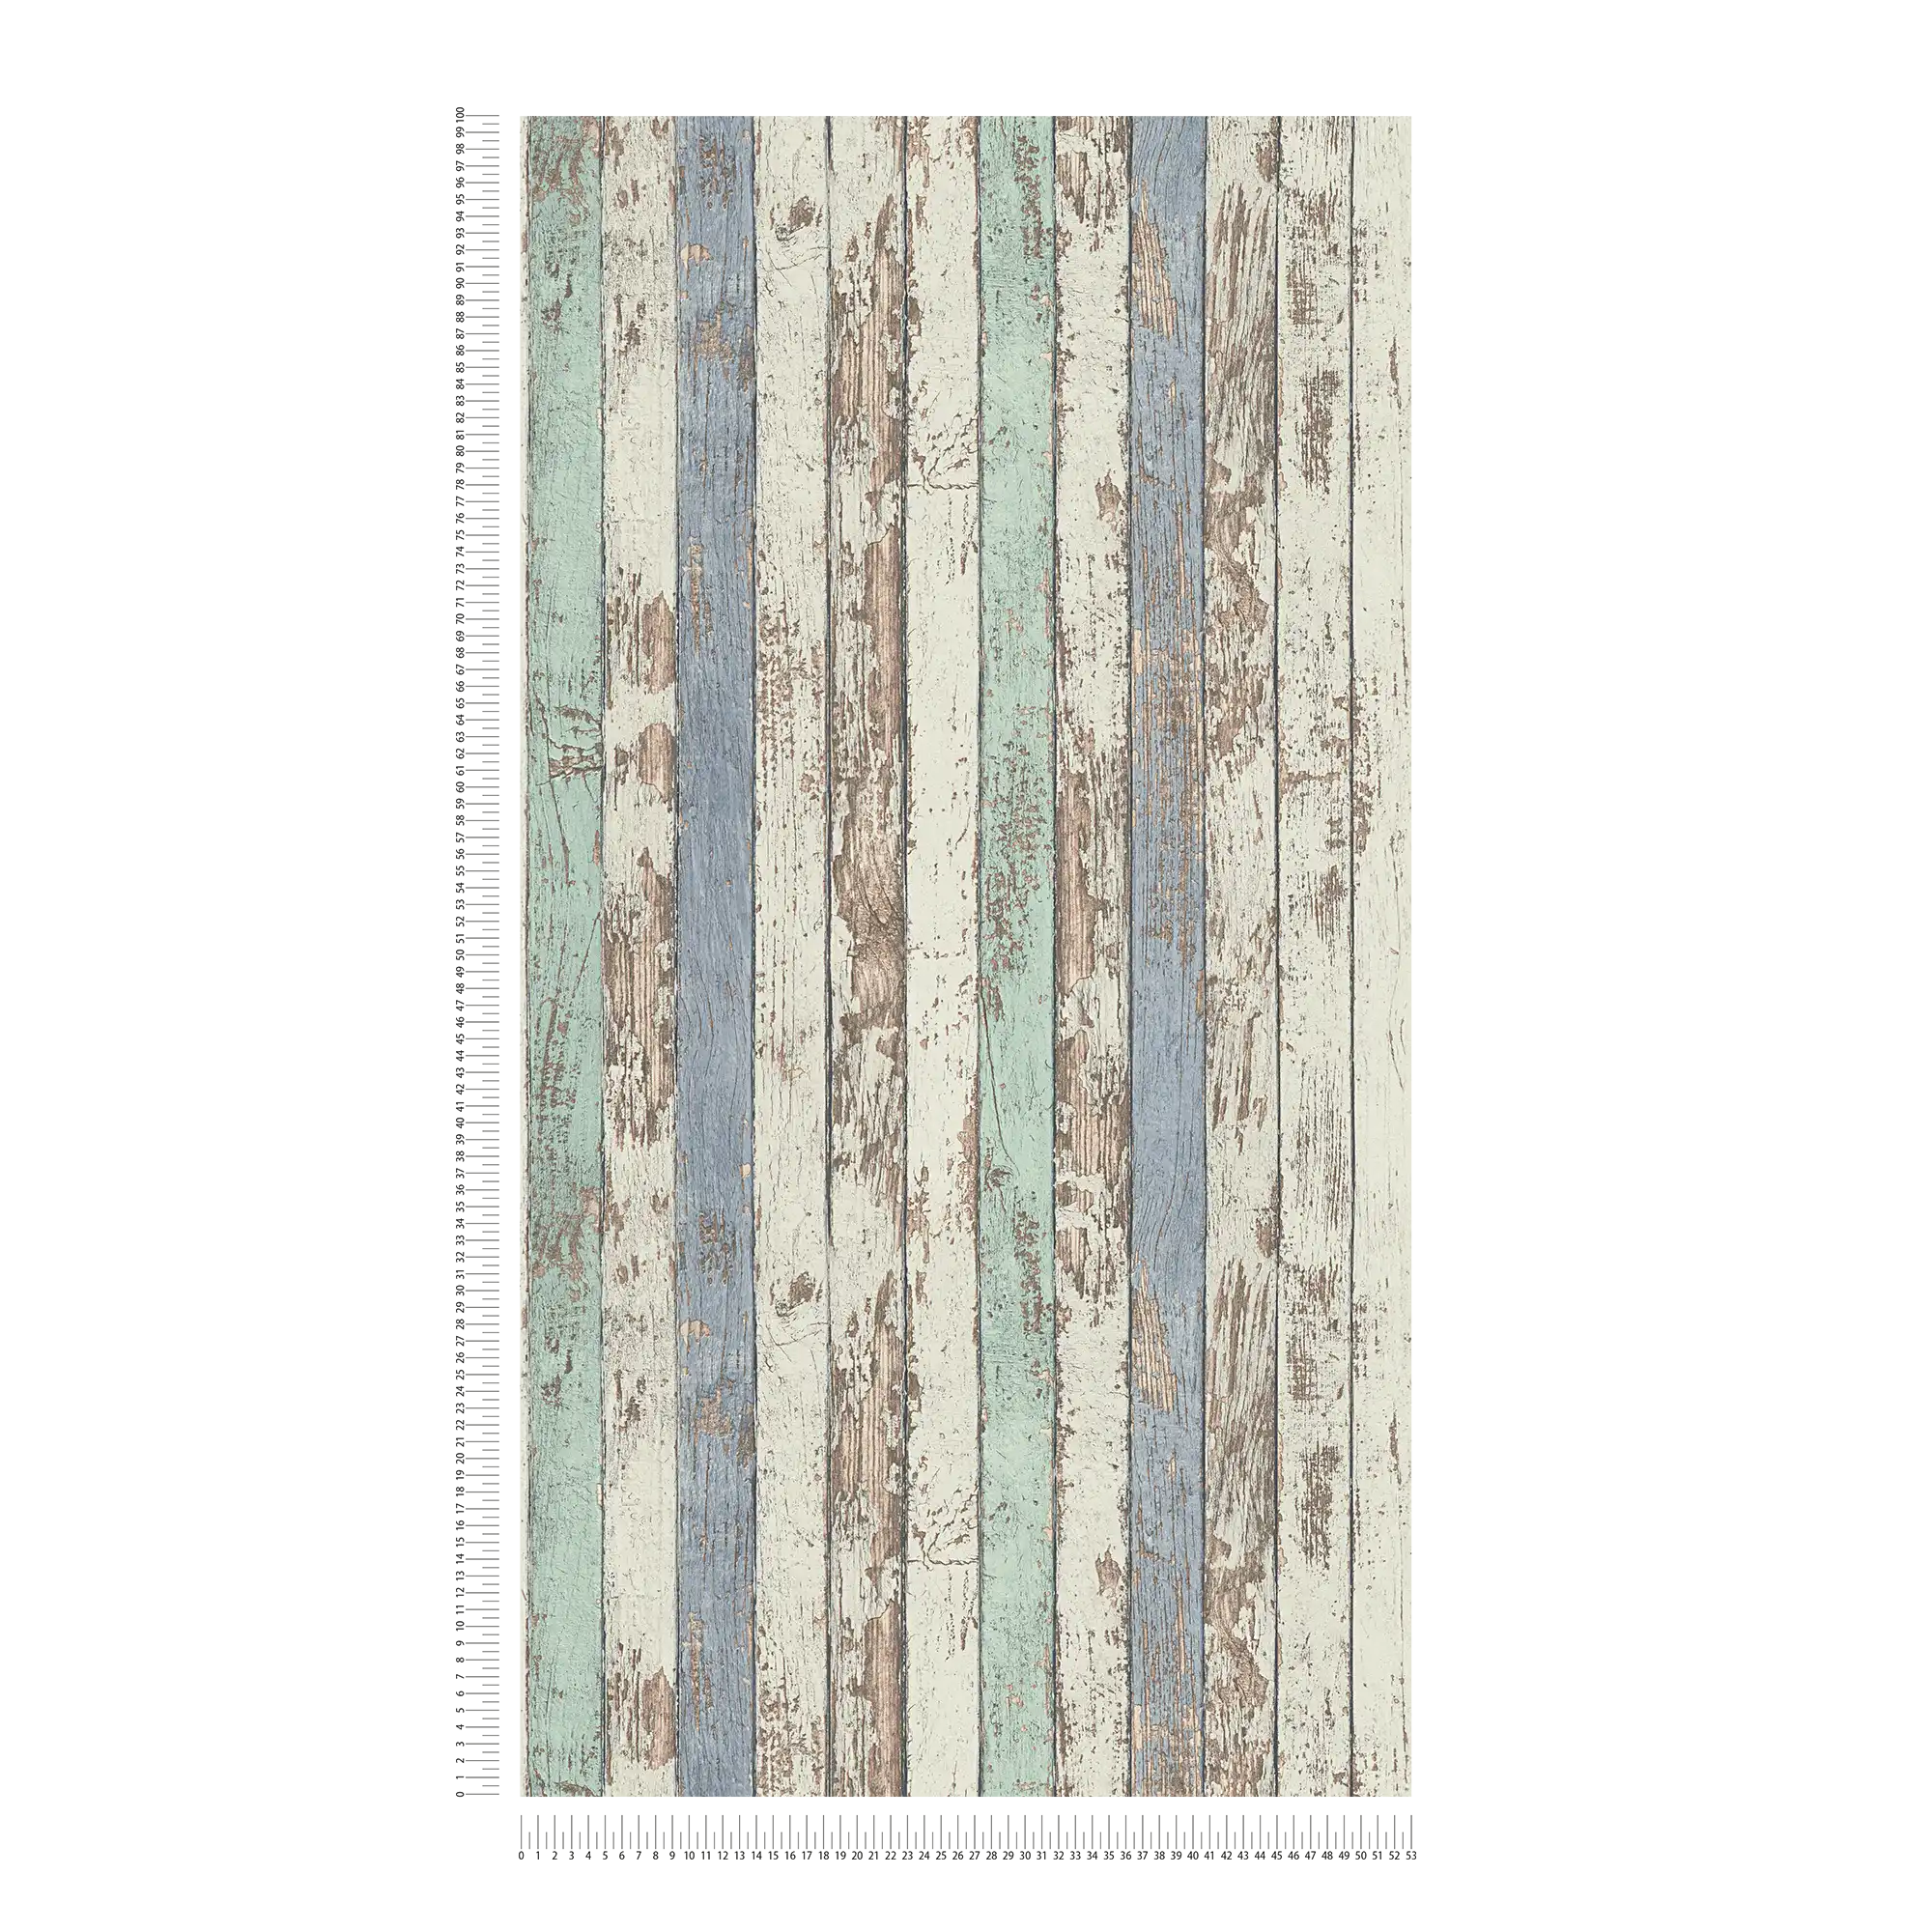             Wooden wallpaper with colourful board motif in shabby chic style - white, brown, blue
        